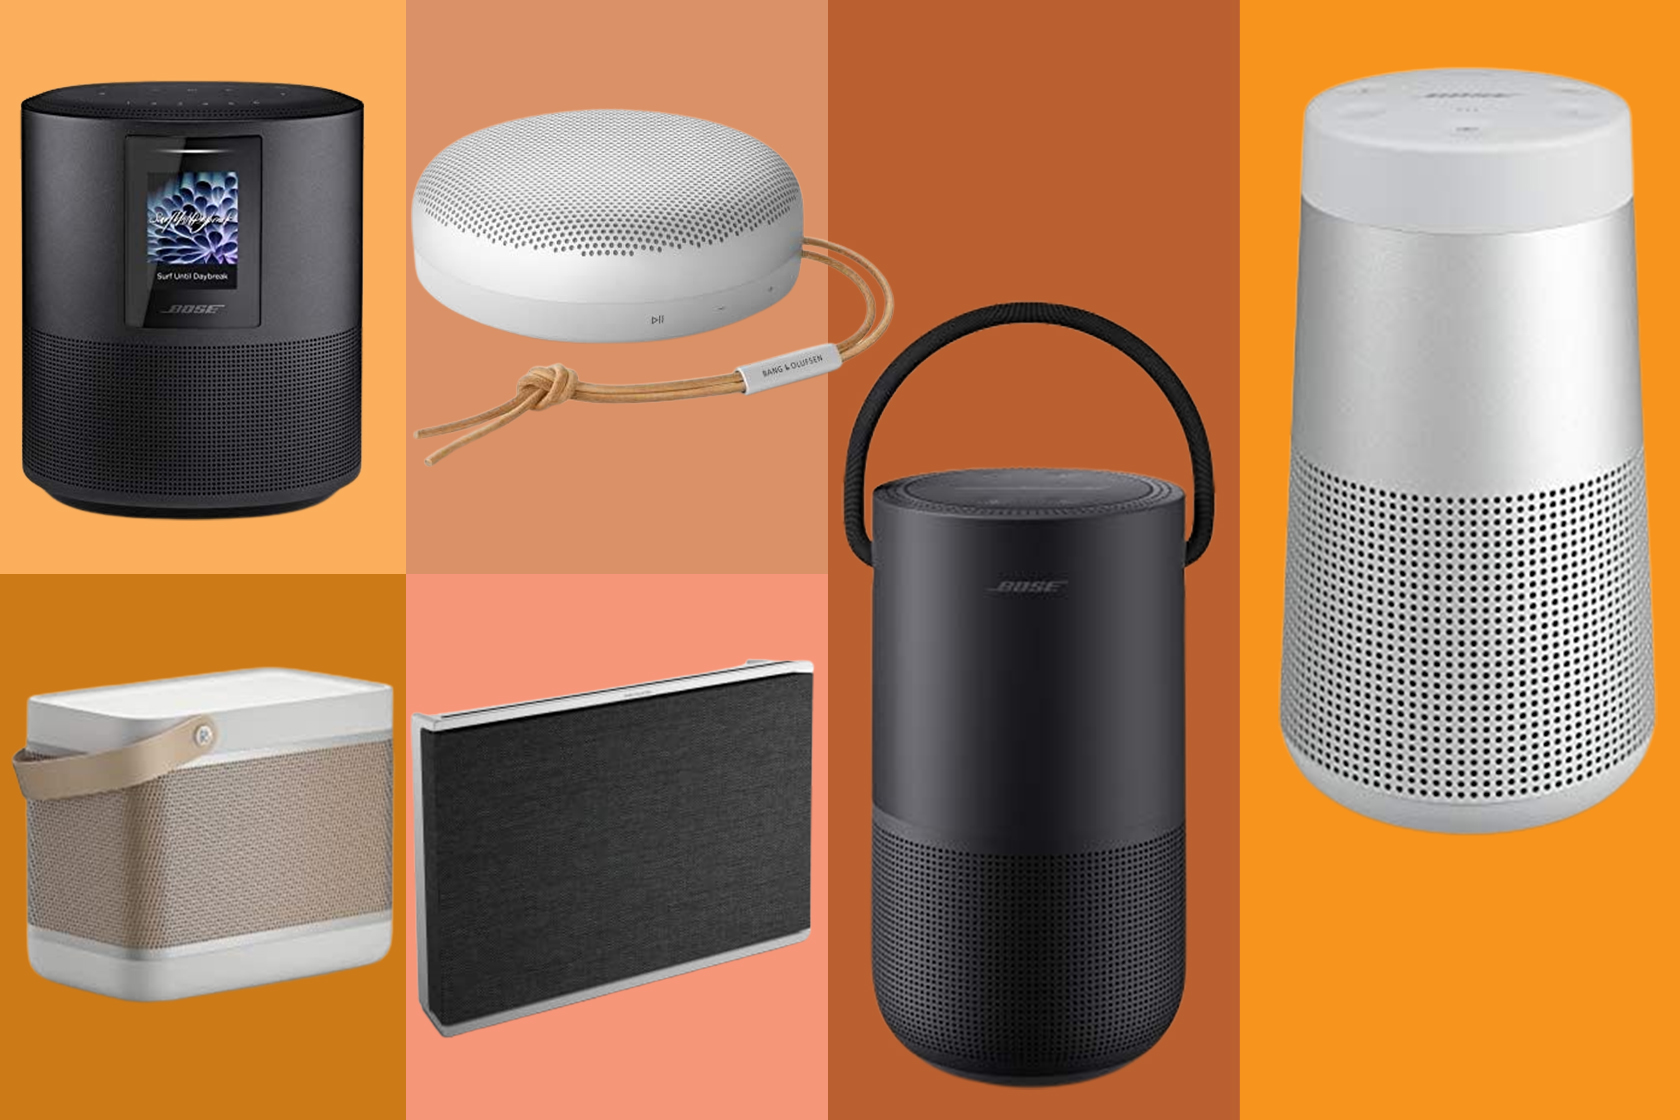 & Olufsen and Bose bluetooth speakers comparison